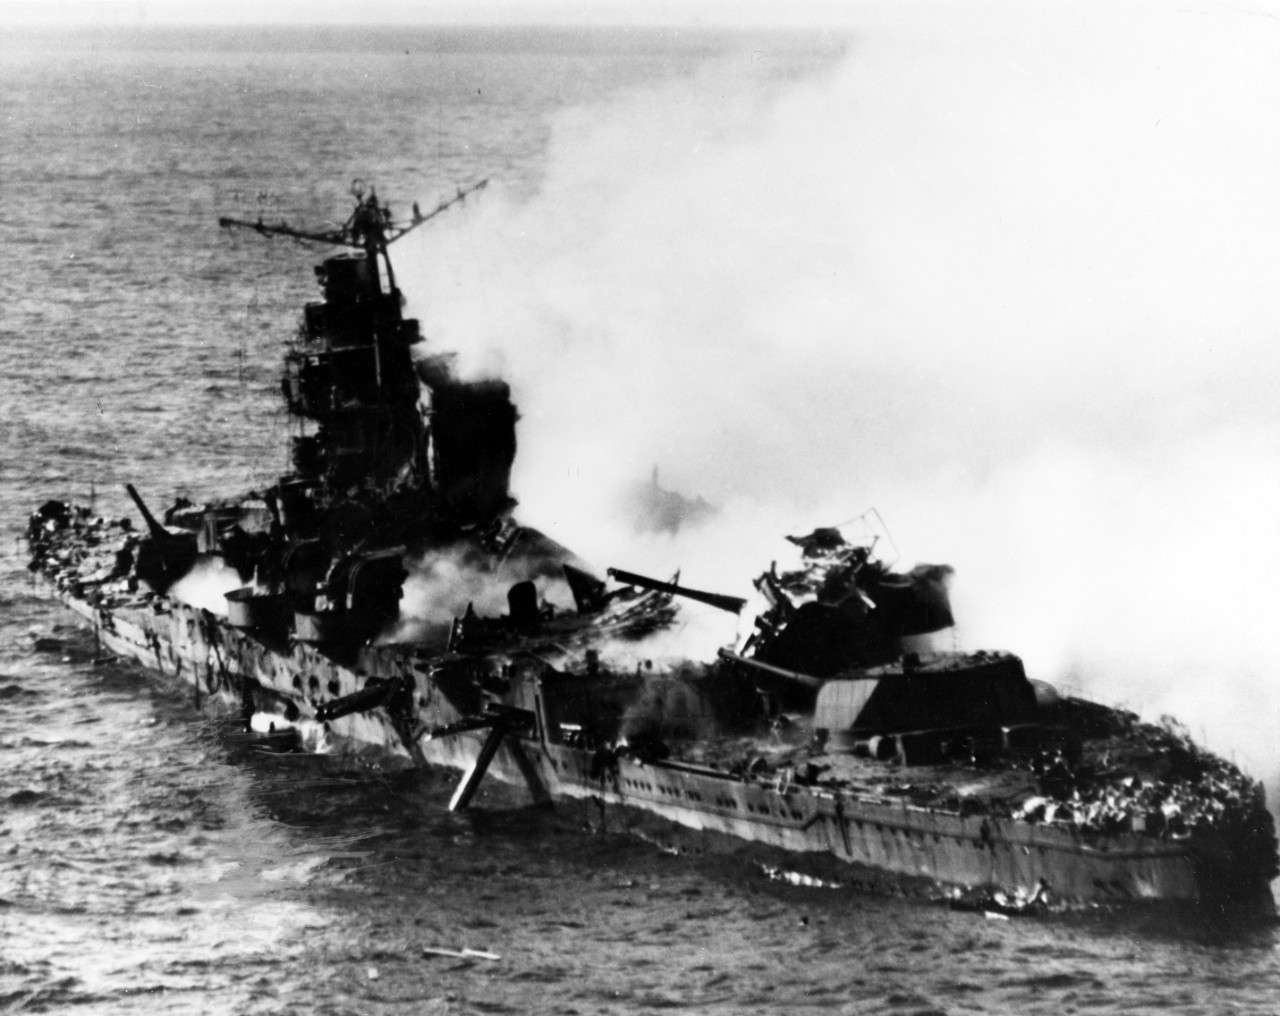 Photo #: 80-G-414422  Battle of Midway, June 1942